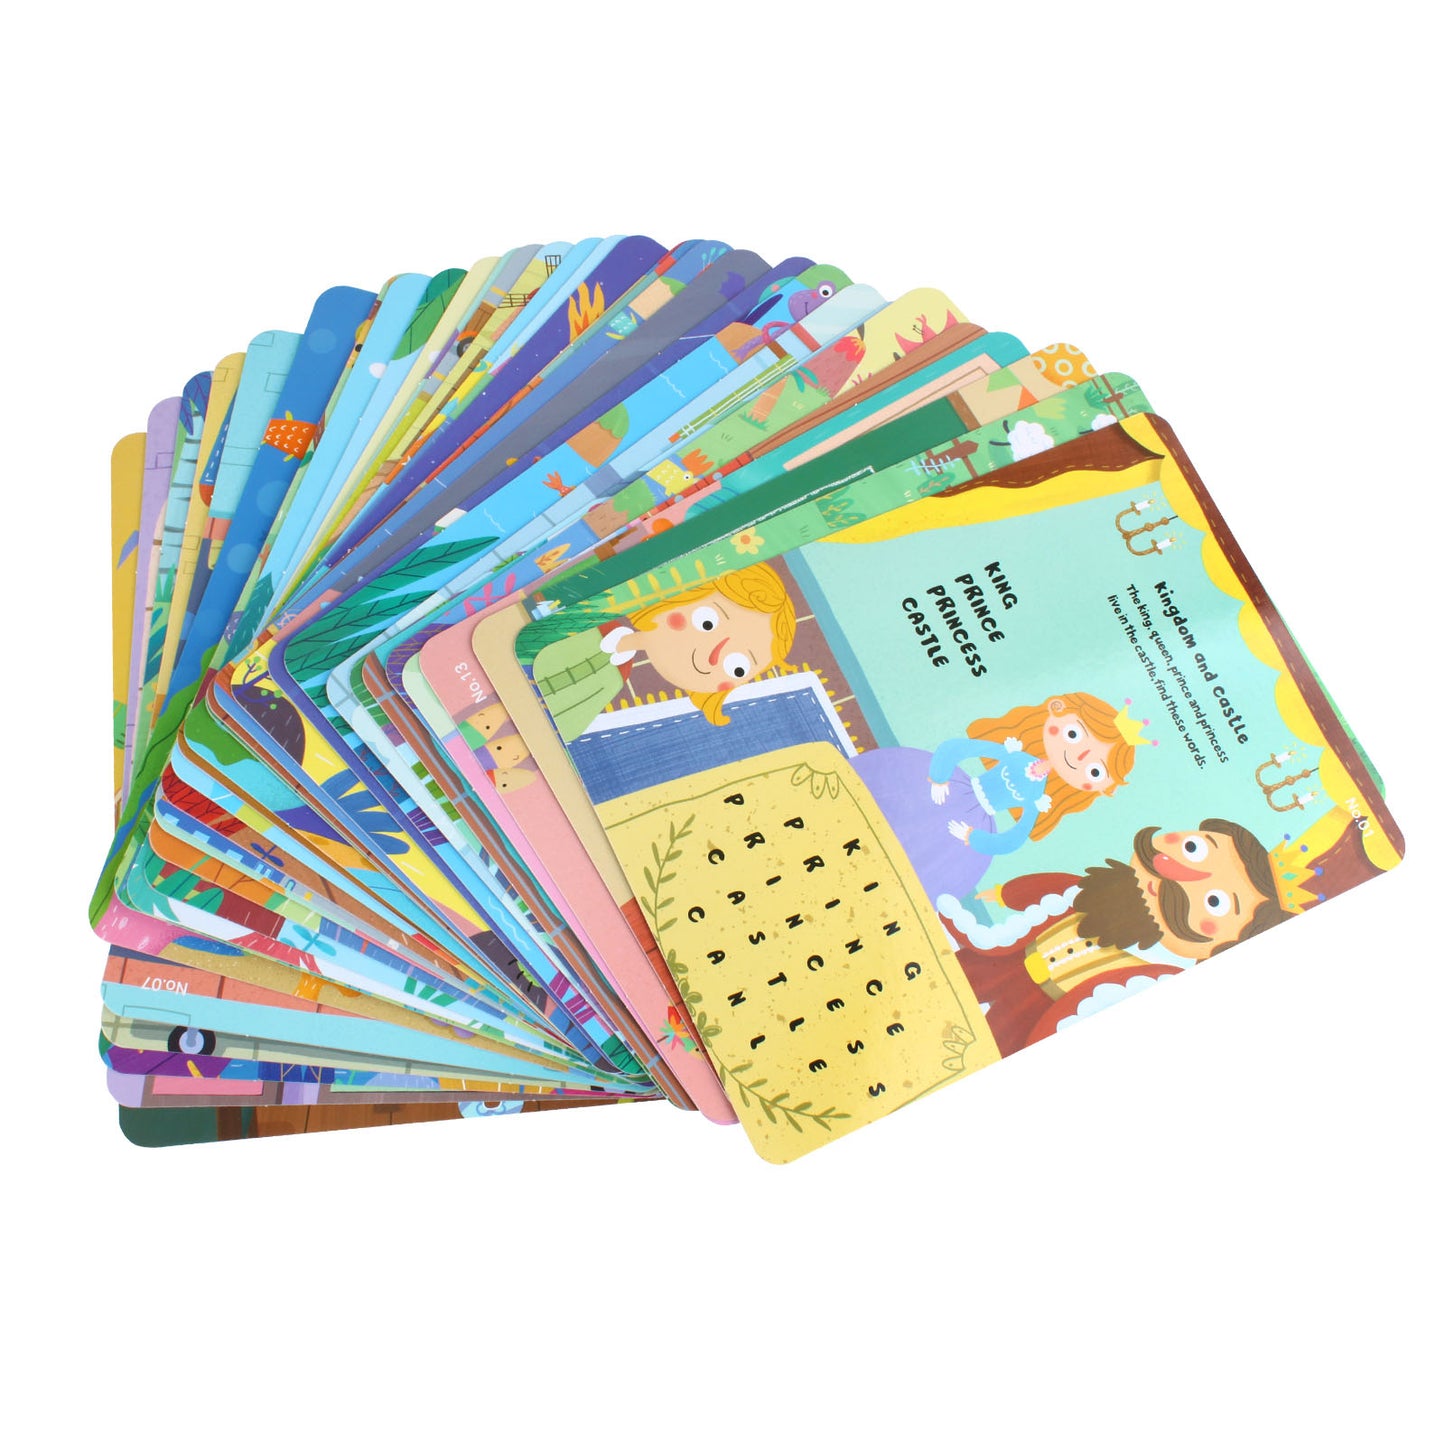 Nooly Preschool Toddler Flash Cards,(Word Search for Kid) PW0218